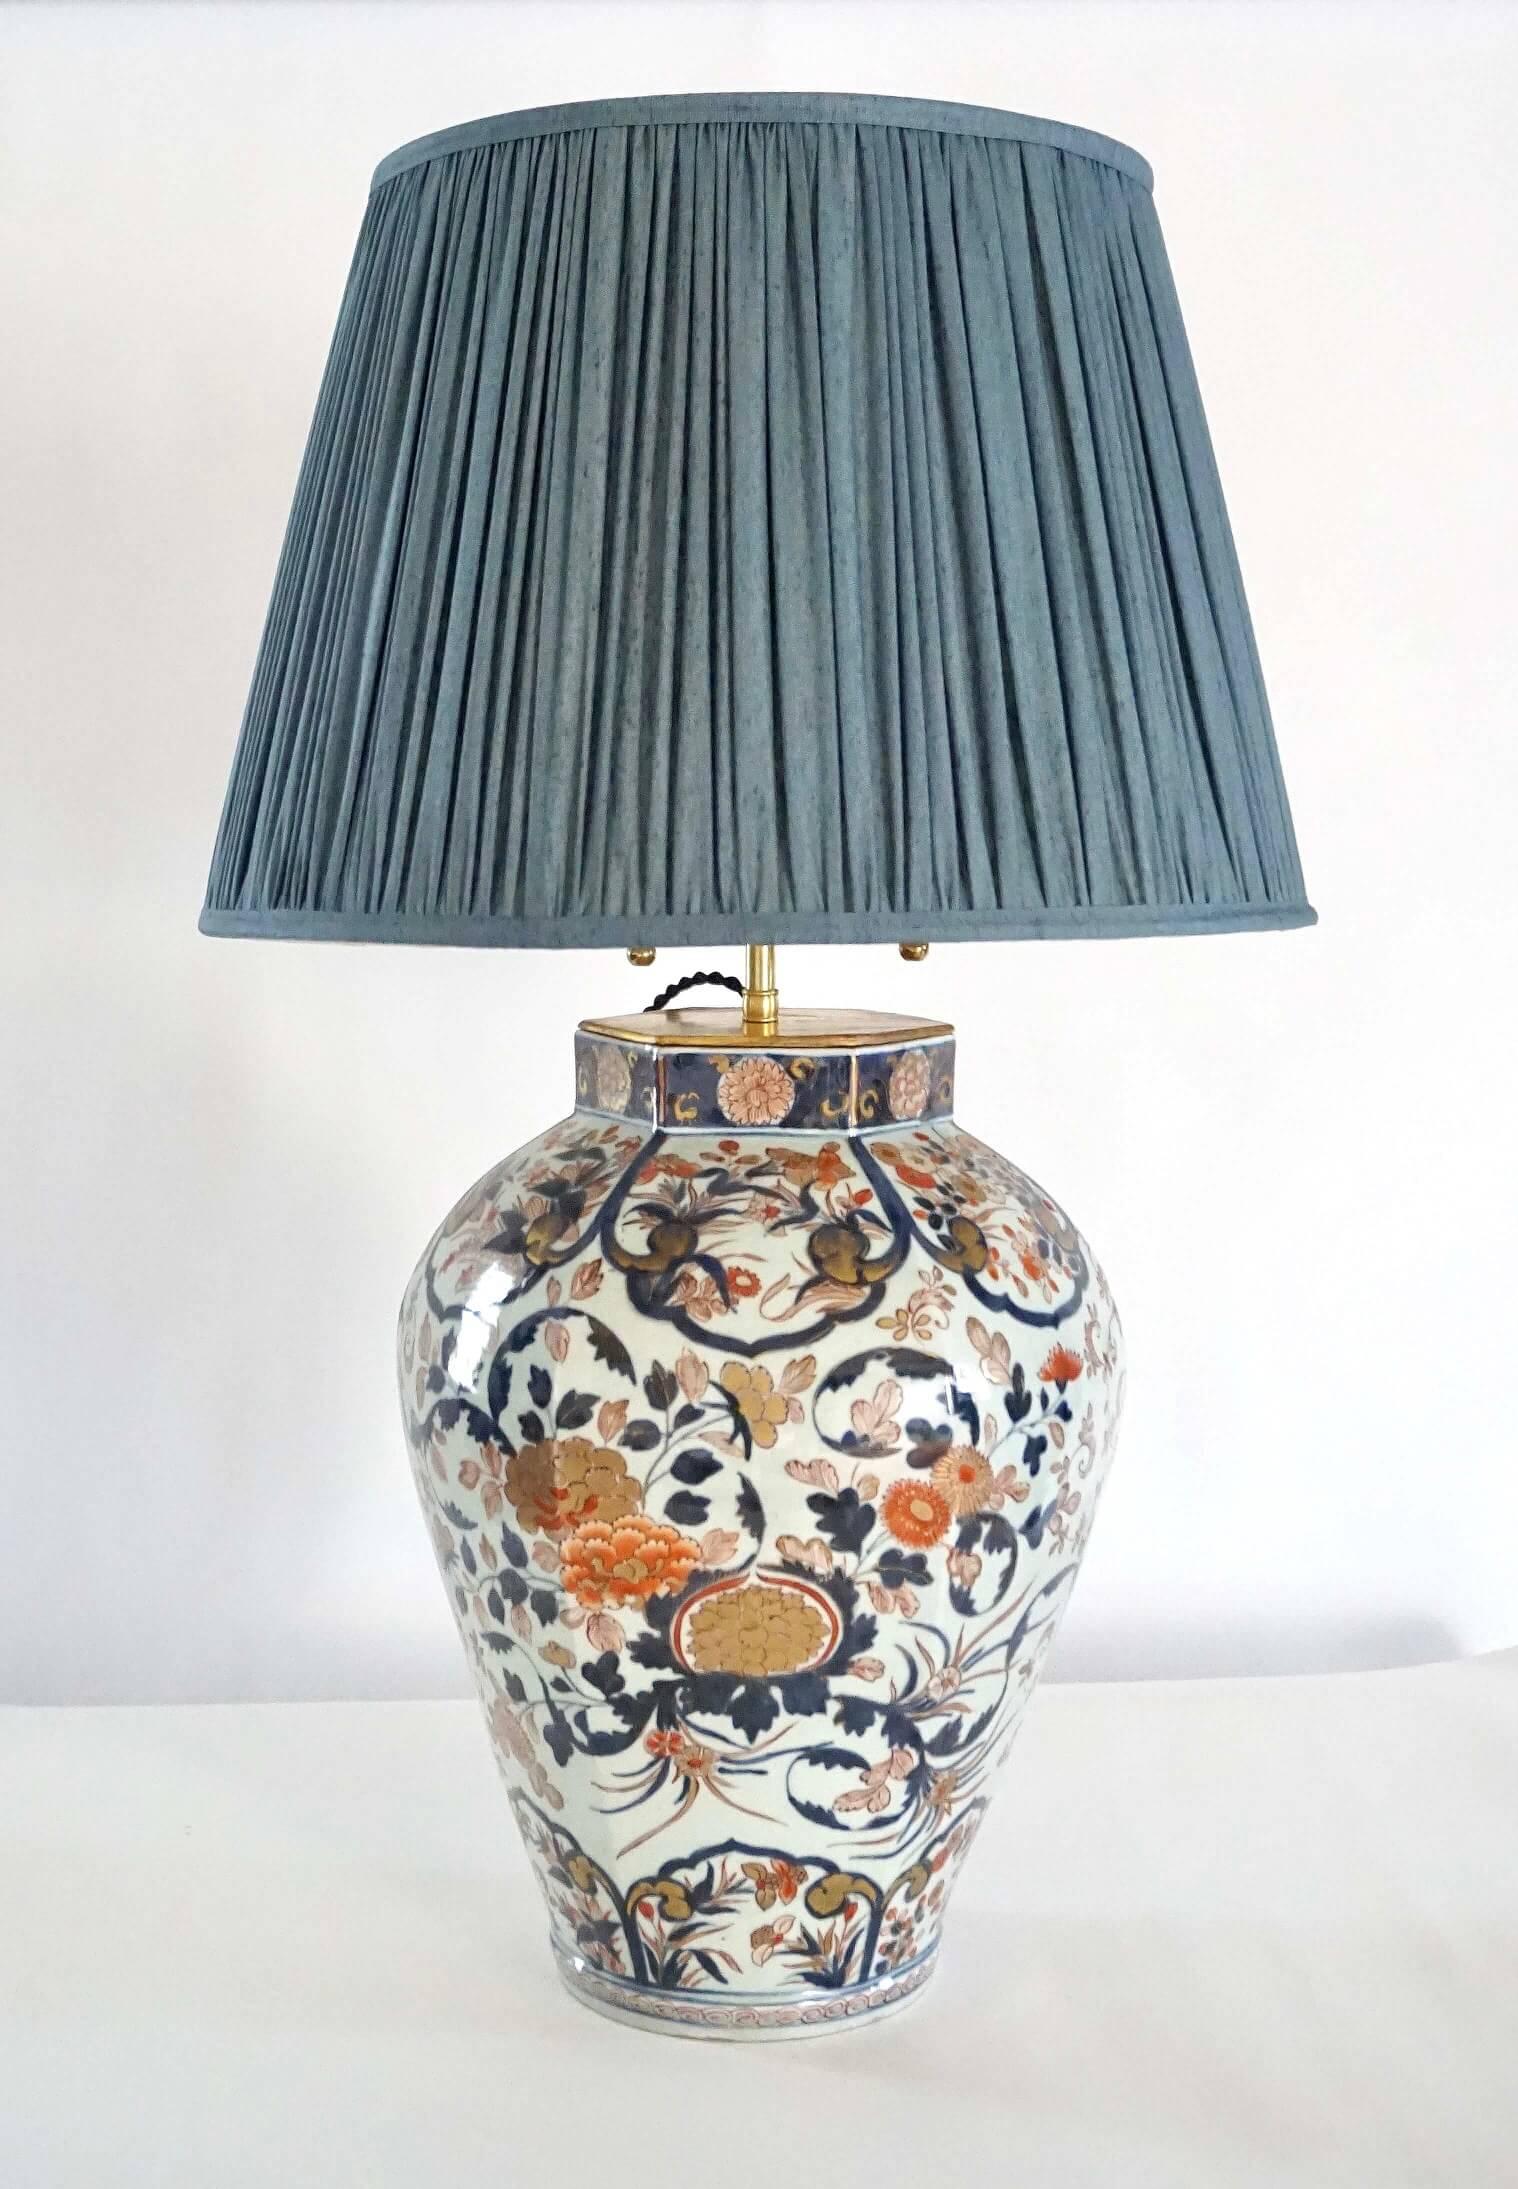 A late 17th, early 18th century Japanese Edo period Imari porcelain vase or jar of hexagonal baluster form having underglaze blue and overglaze iron red and gold gilt panel and foliate designs; now fitted for use as a table lamp with a bespoke